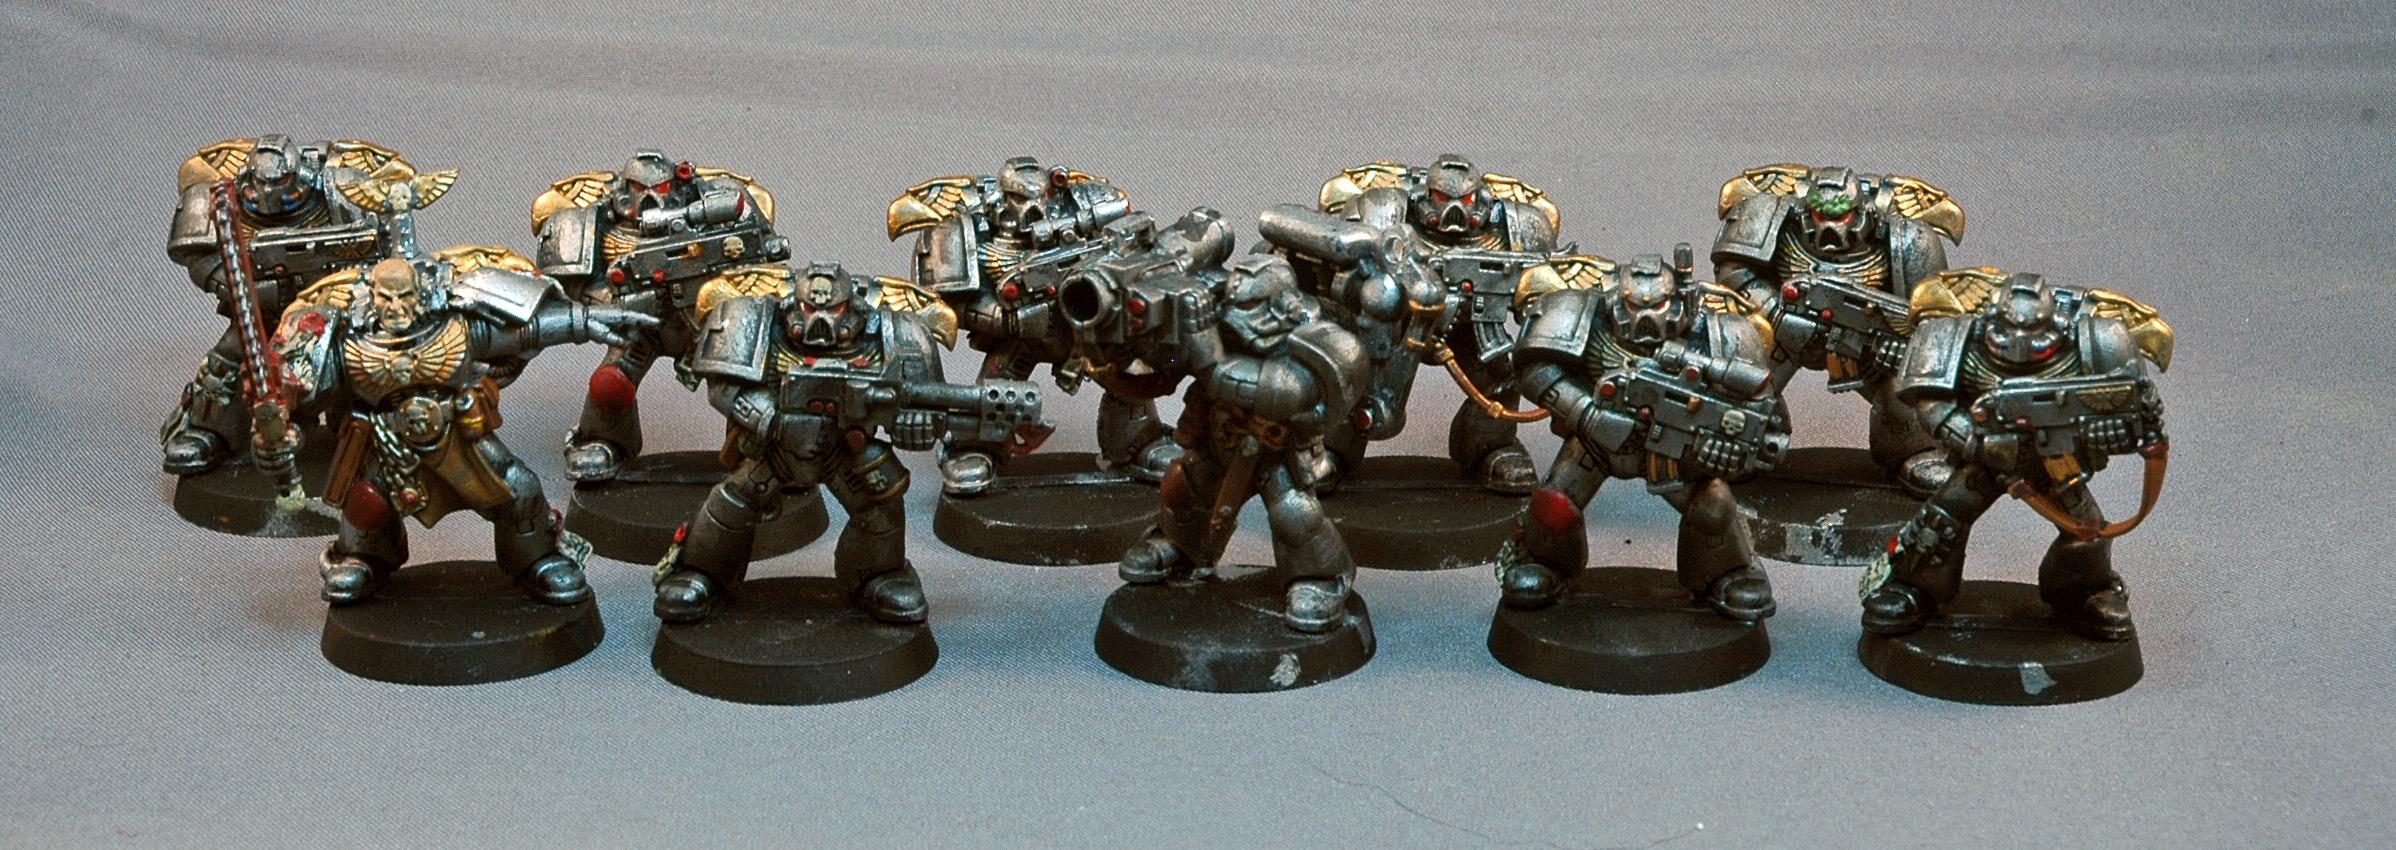 Doom Eagles, Space Marines, Tactical Squad, Warhammer 40,000